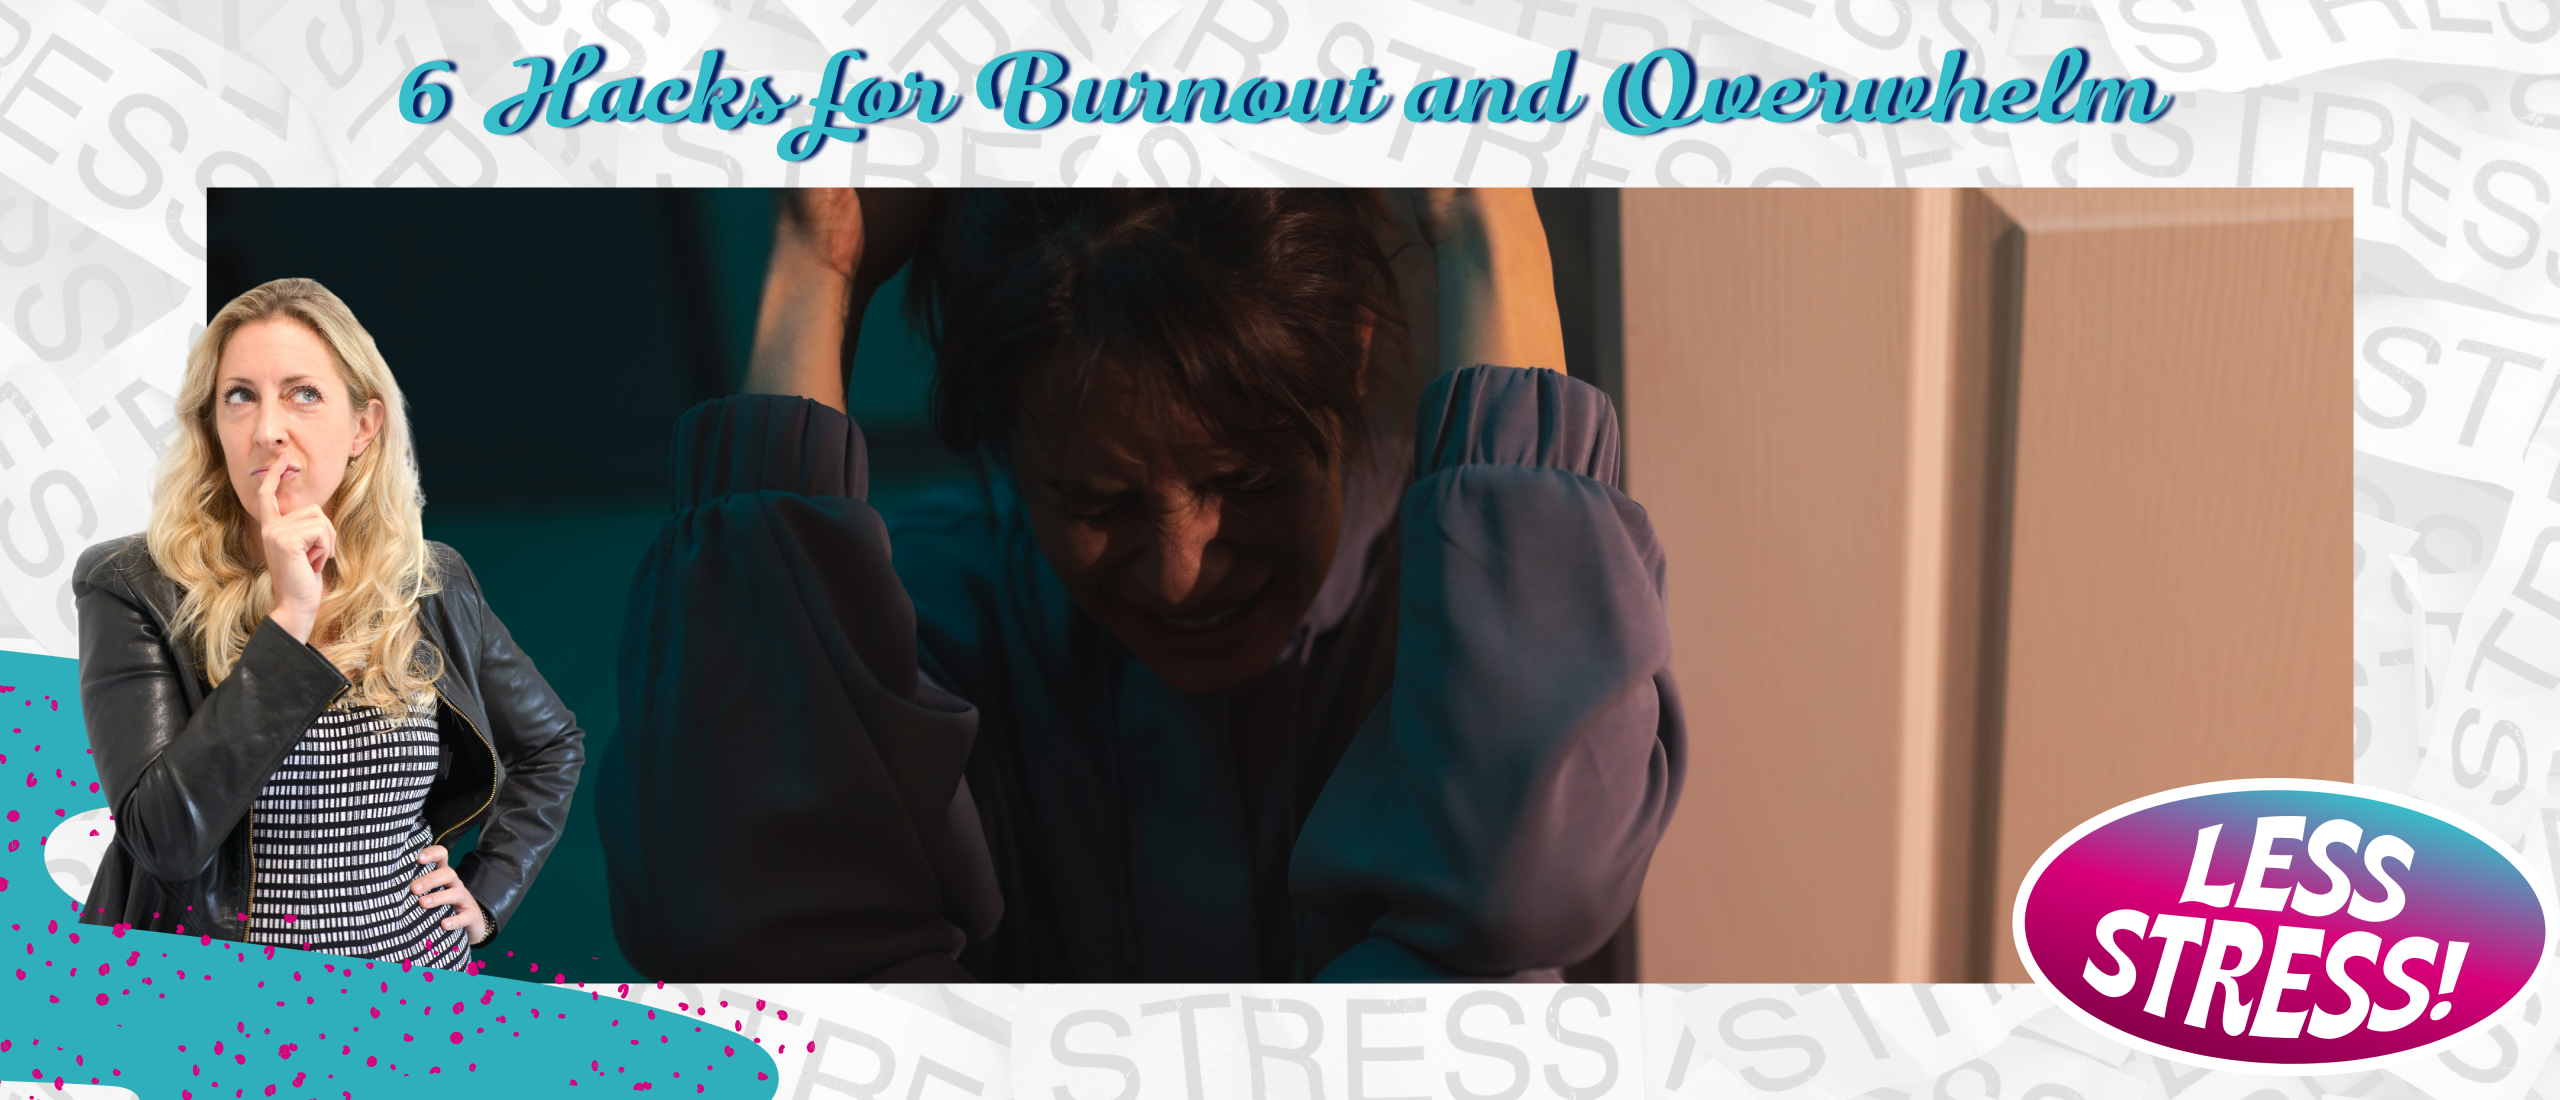 6 Hacks for Burnout and Overwhelm